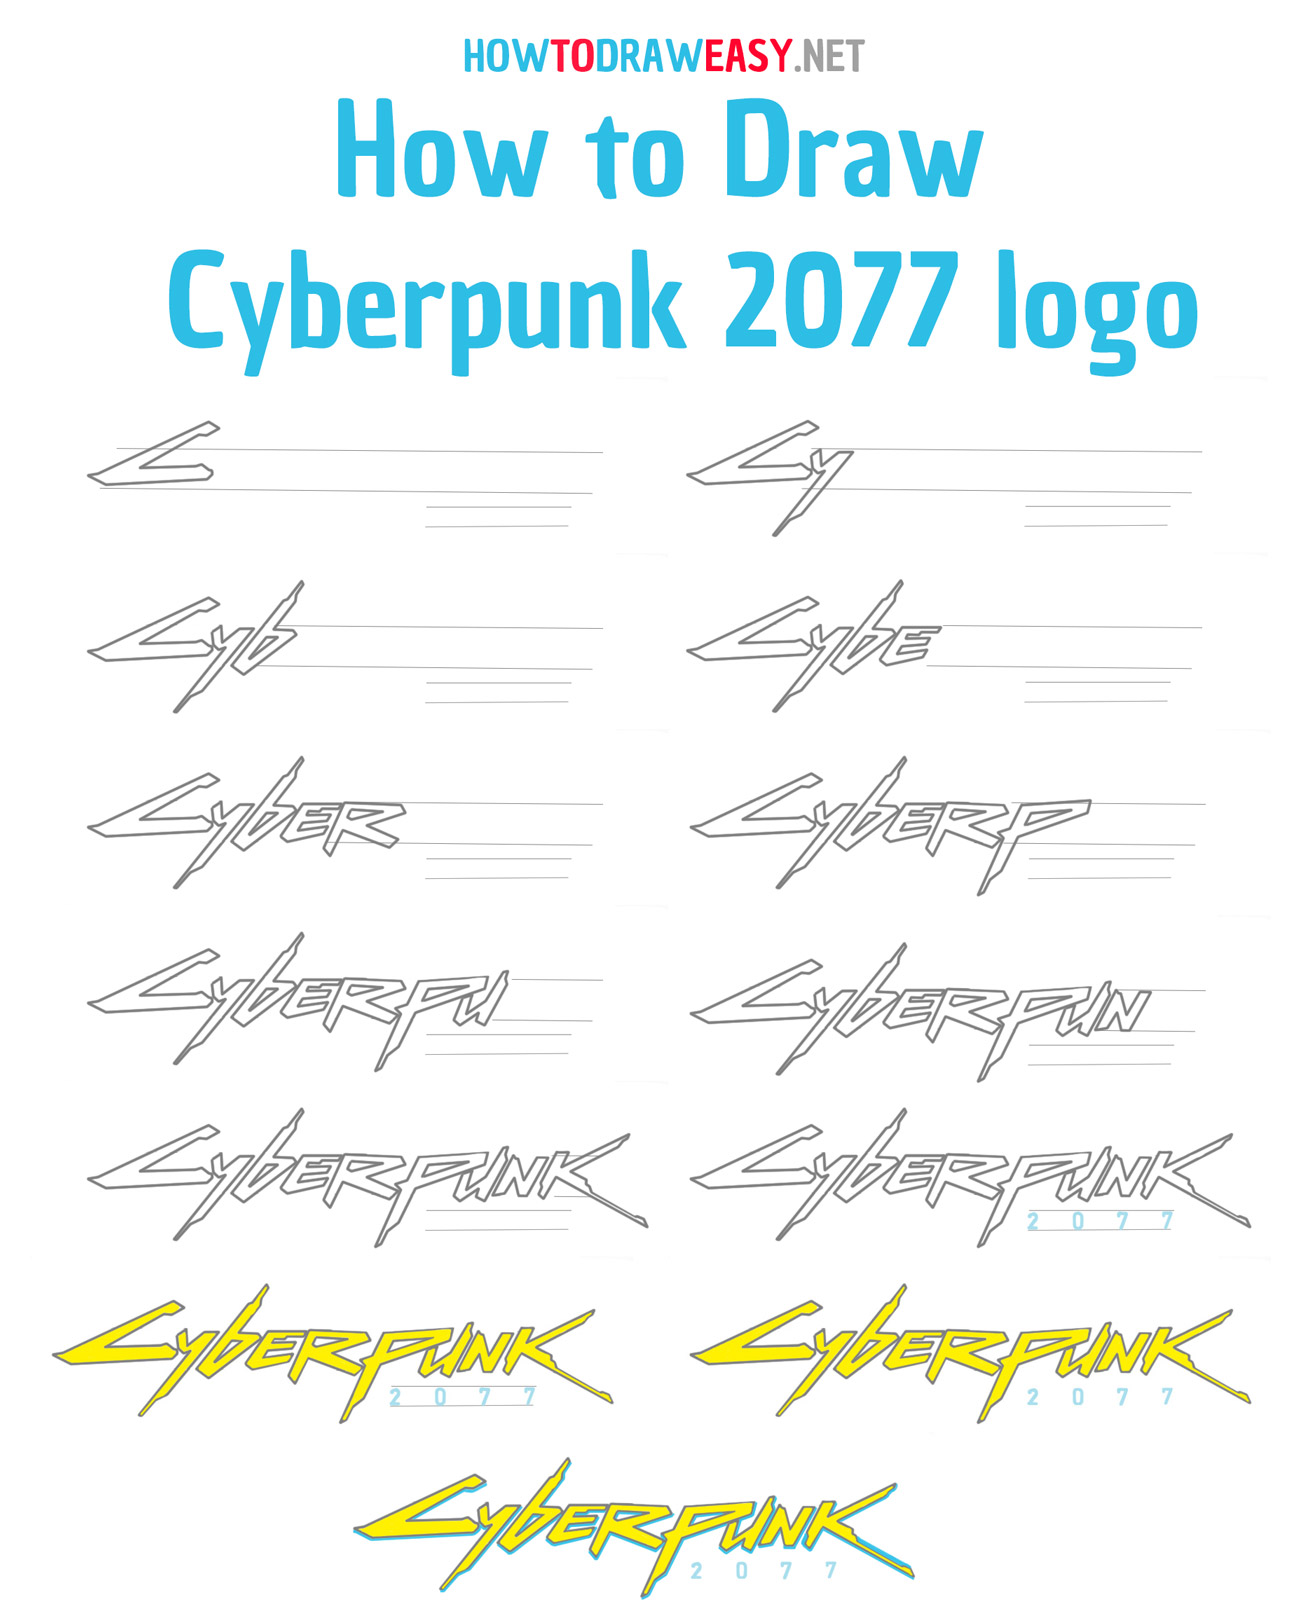 how to draw cyberpunk step by step